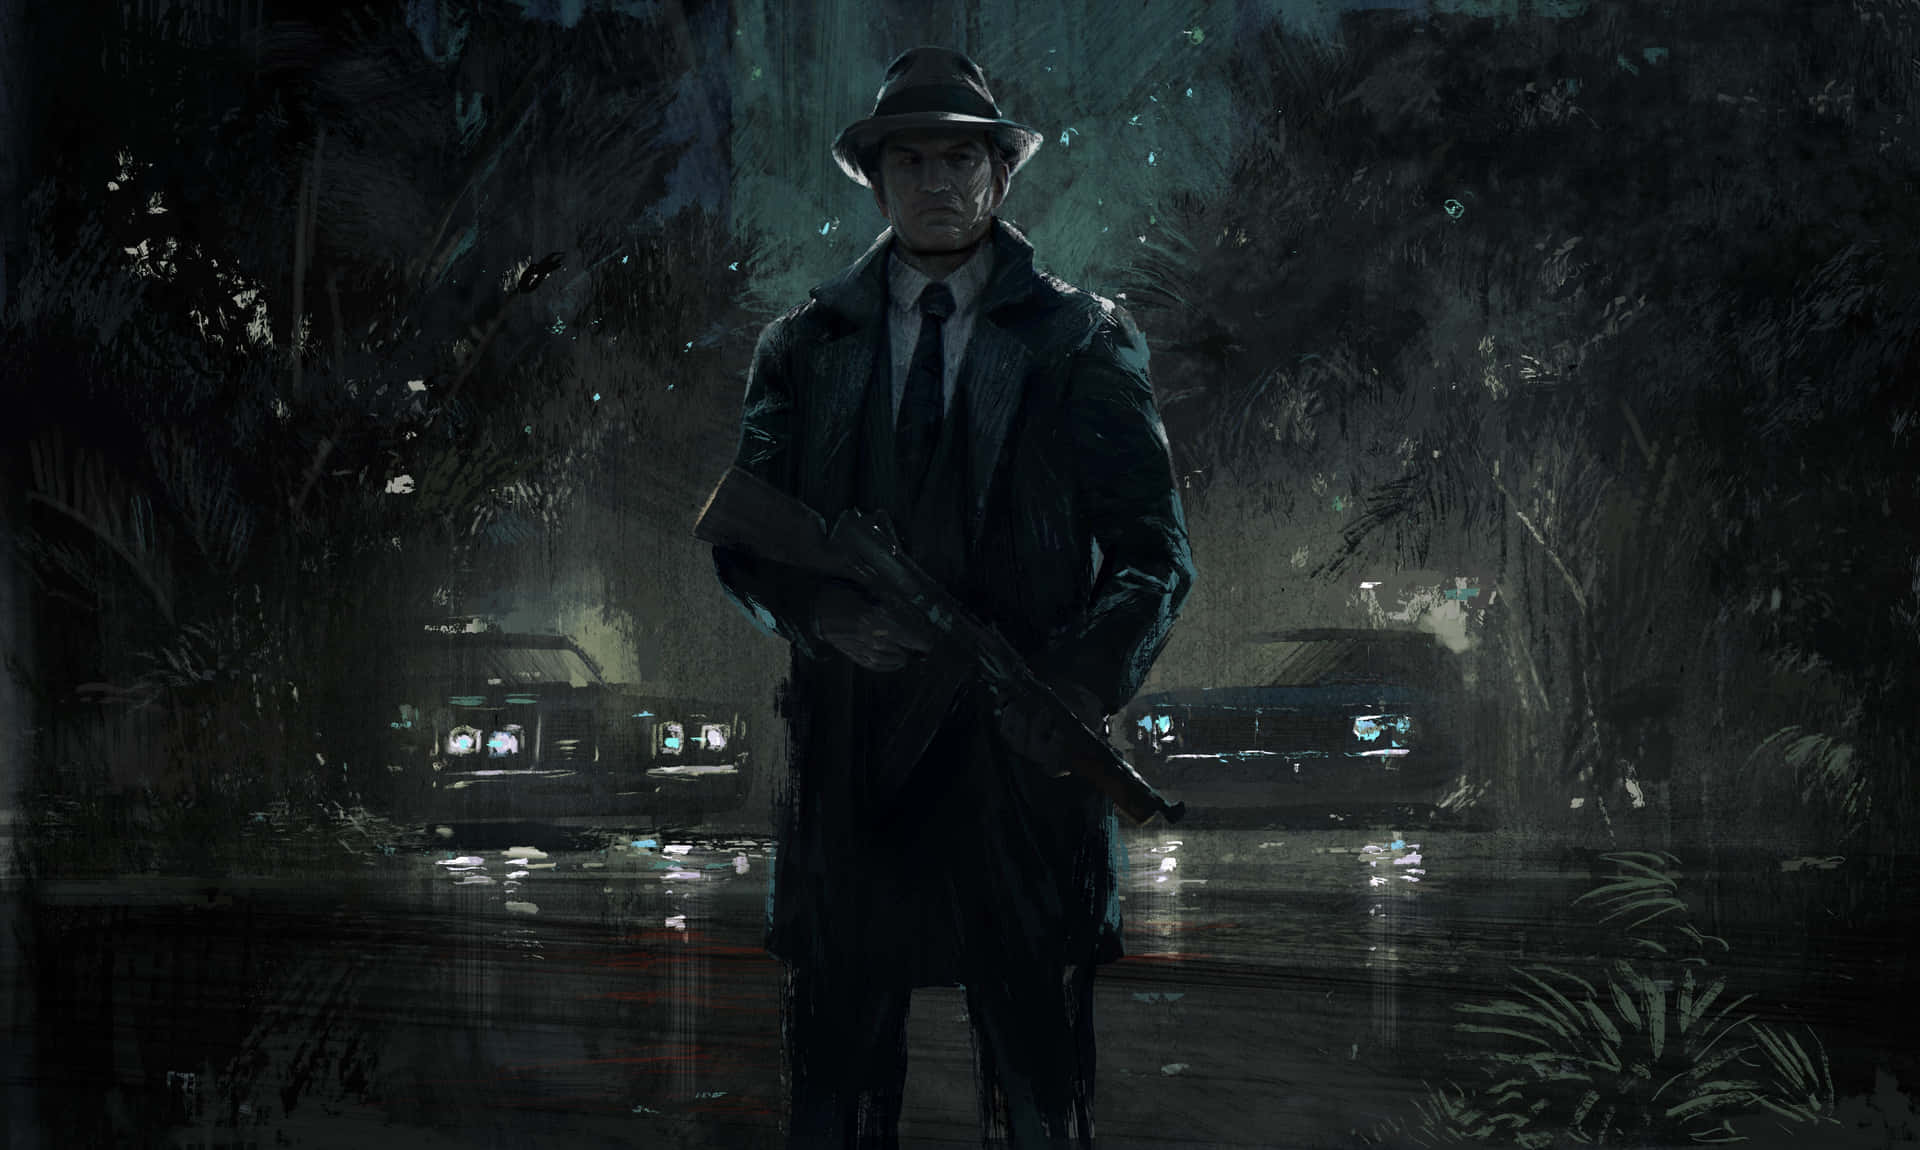 A Man In A Trench Coat Standing In The Rain